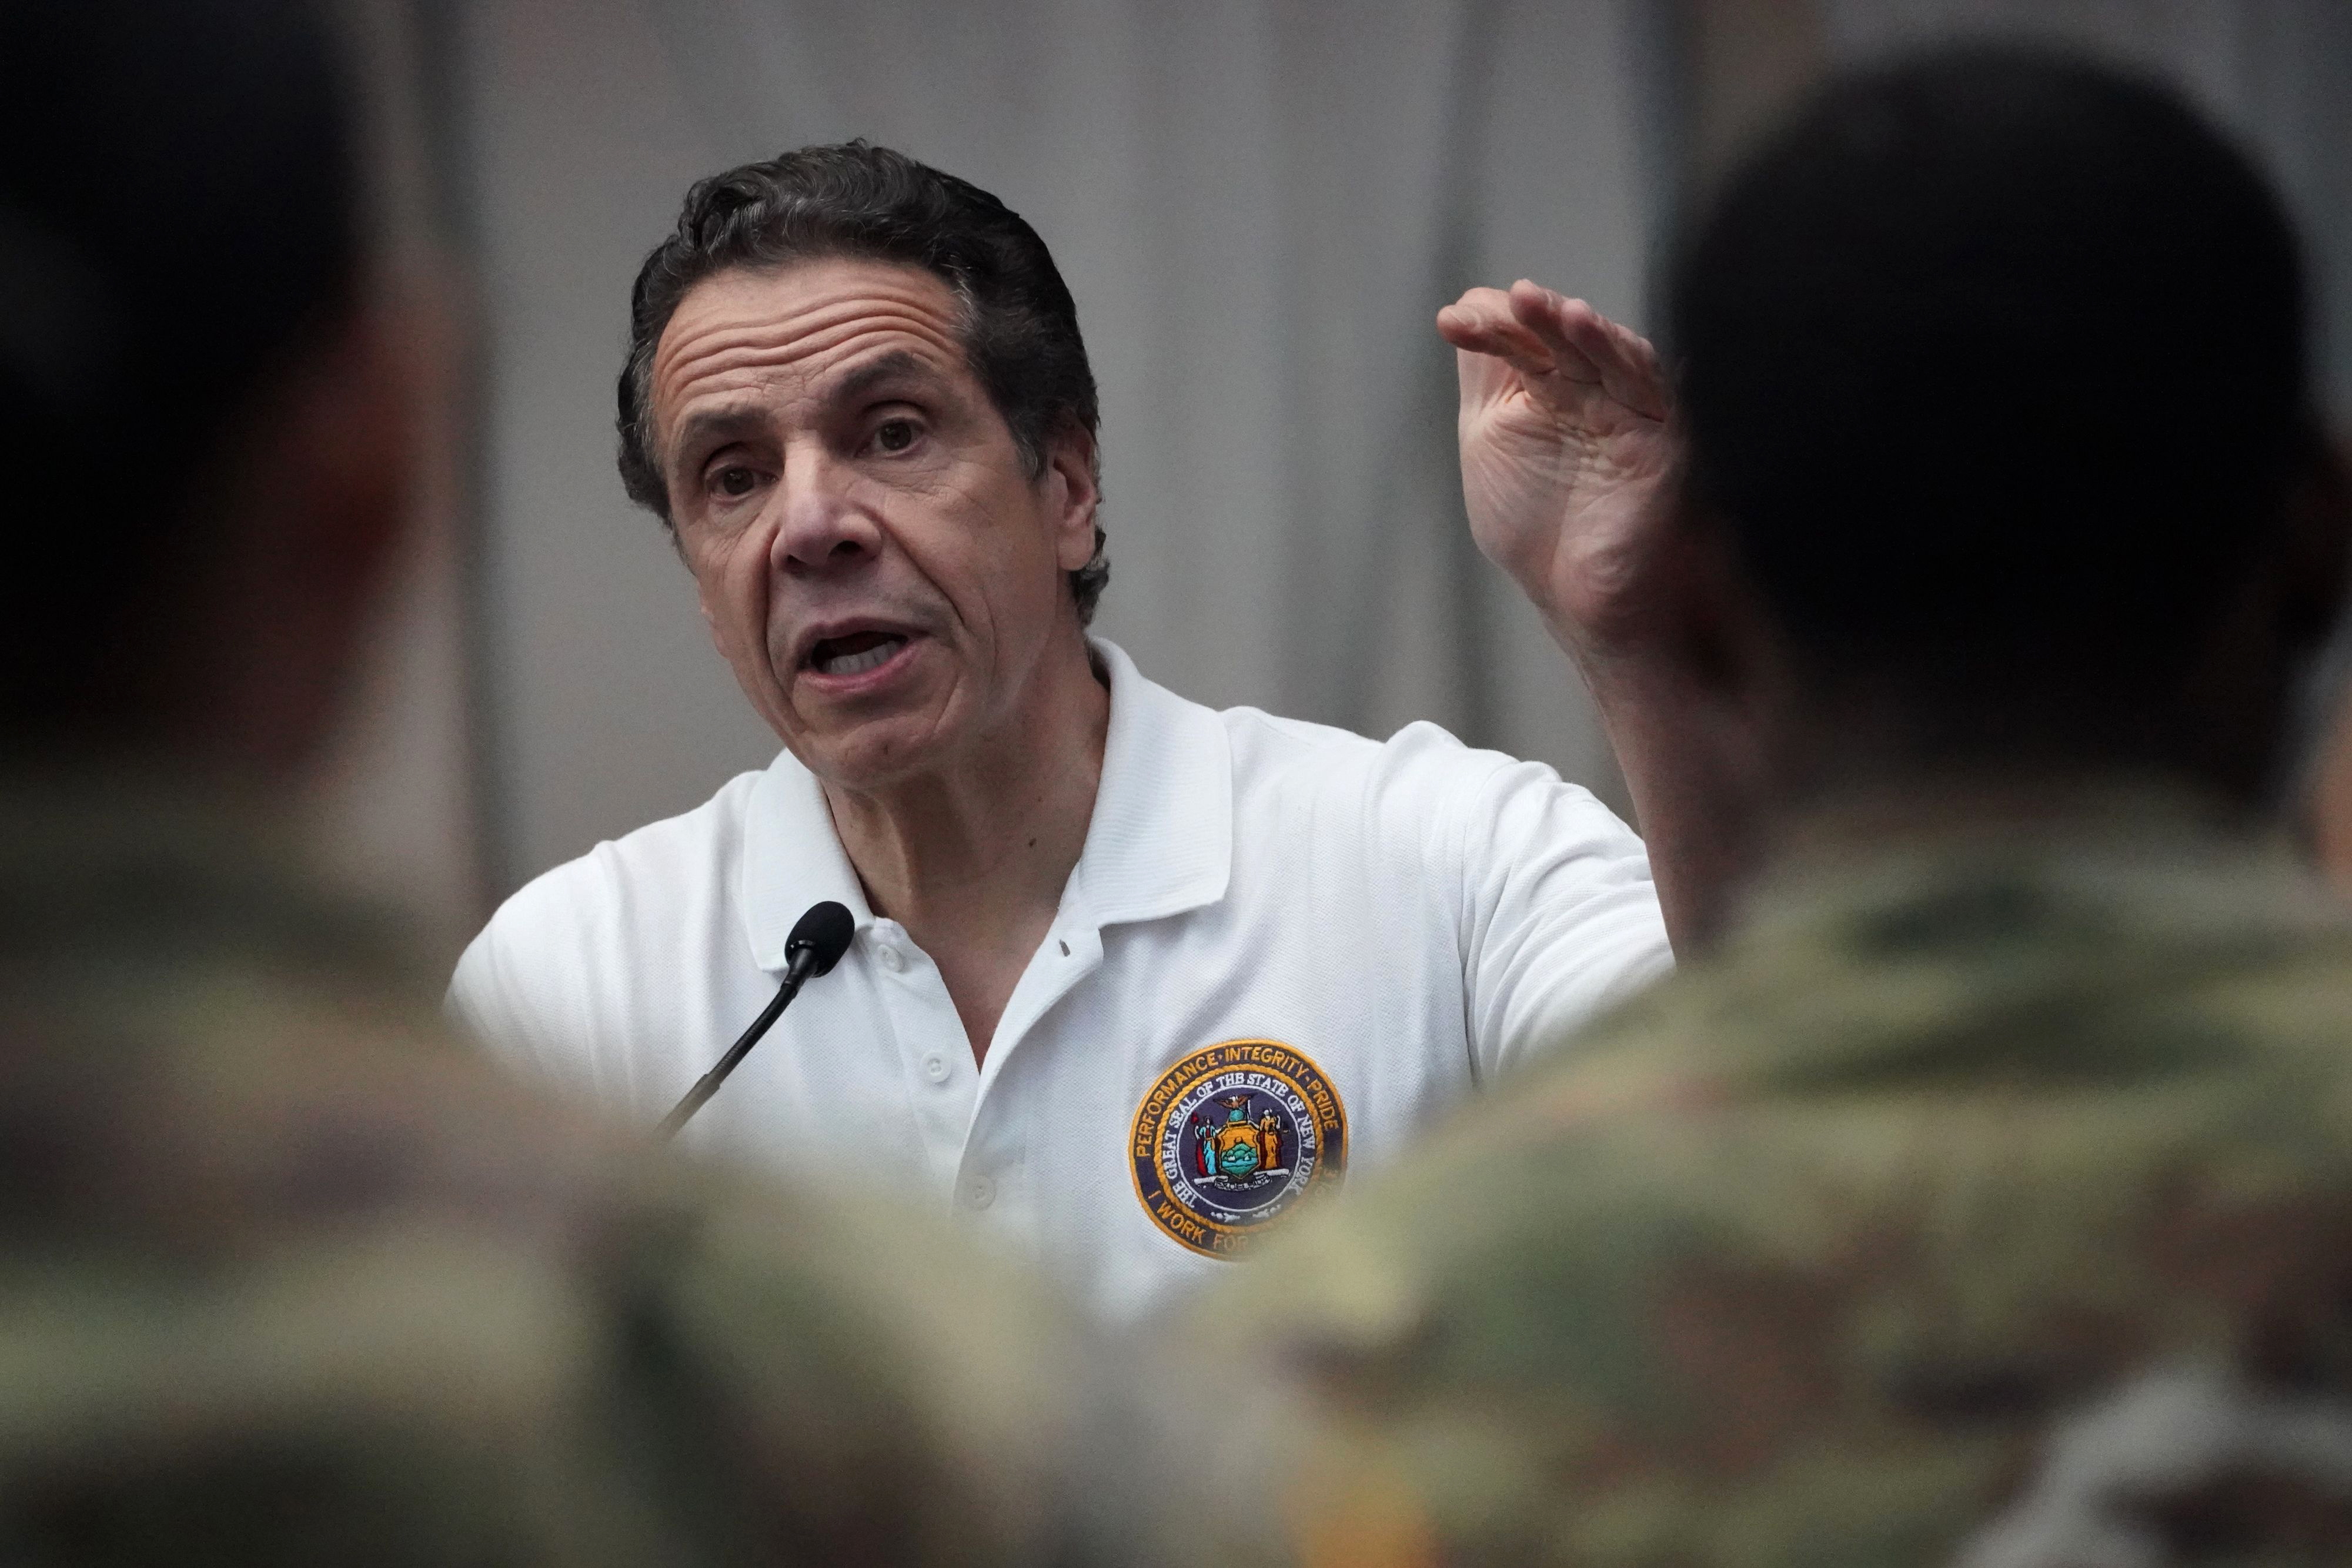 National Guard troops listen as New York Gov. Andrew Cuomo speaks at the Javits Center in New York City on March 27.